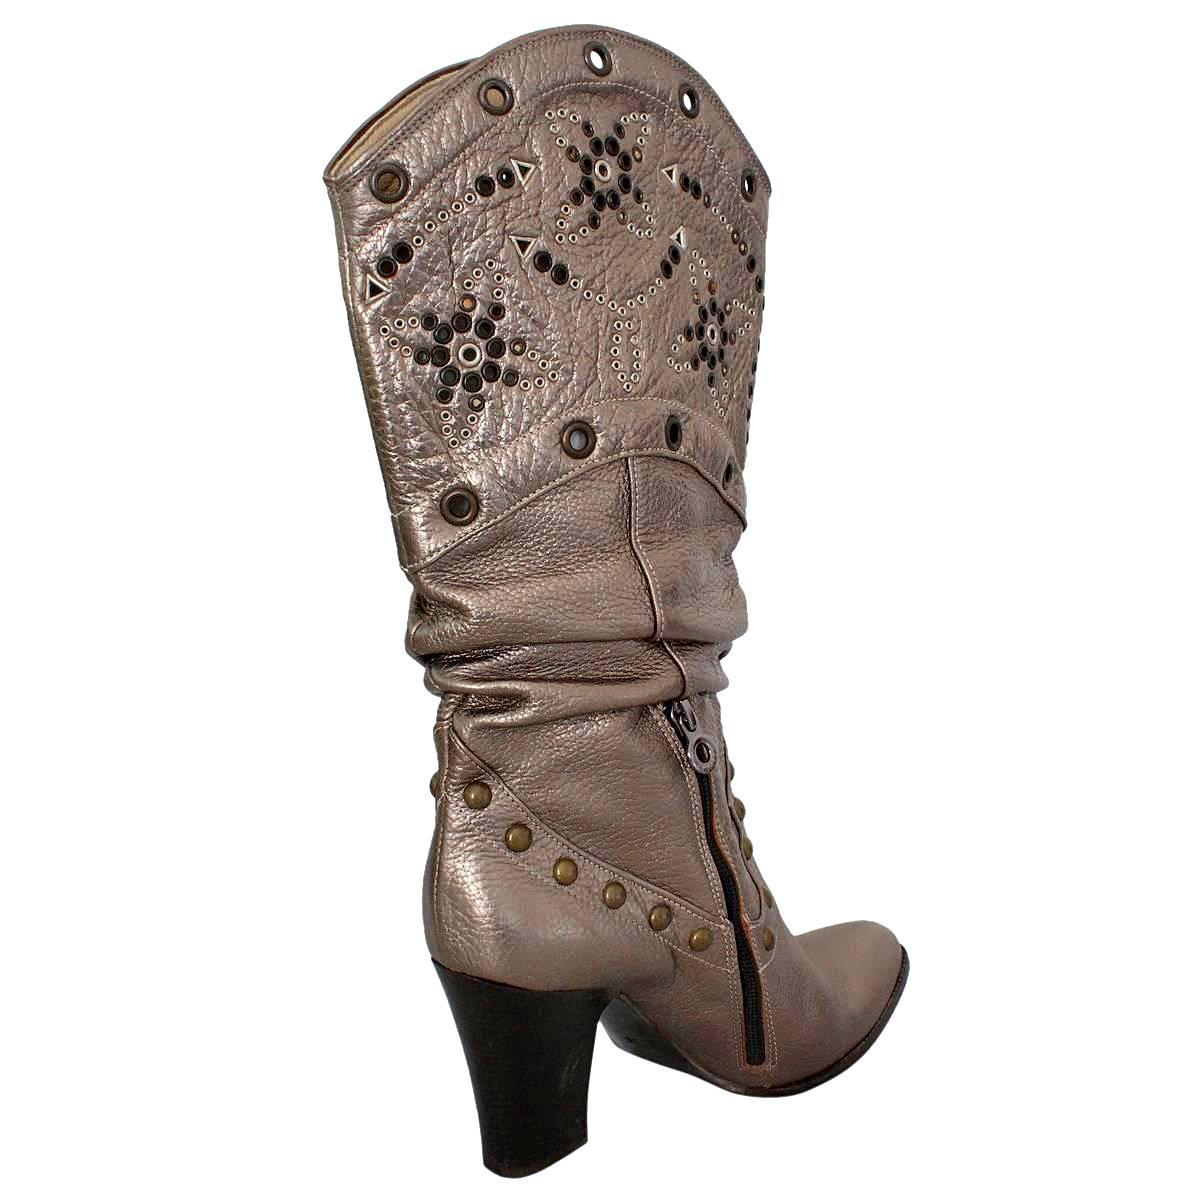 Very beautiful pair of boots by Le Silla
Leather
Silver color
Bronze colored studs applicated
Heel height cm 9 (3.54 inches)
Made in Italy
Worldwide express shipping included in the price !